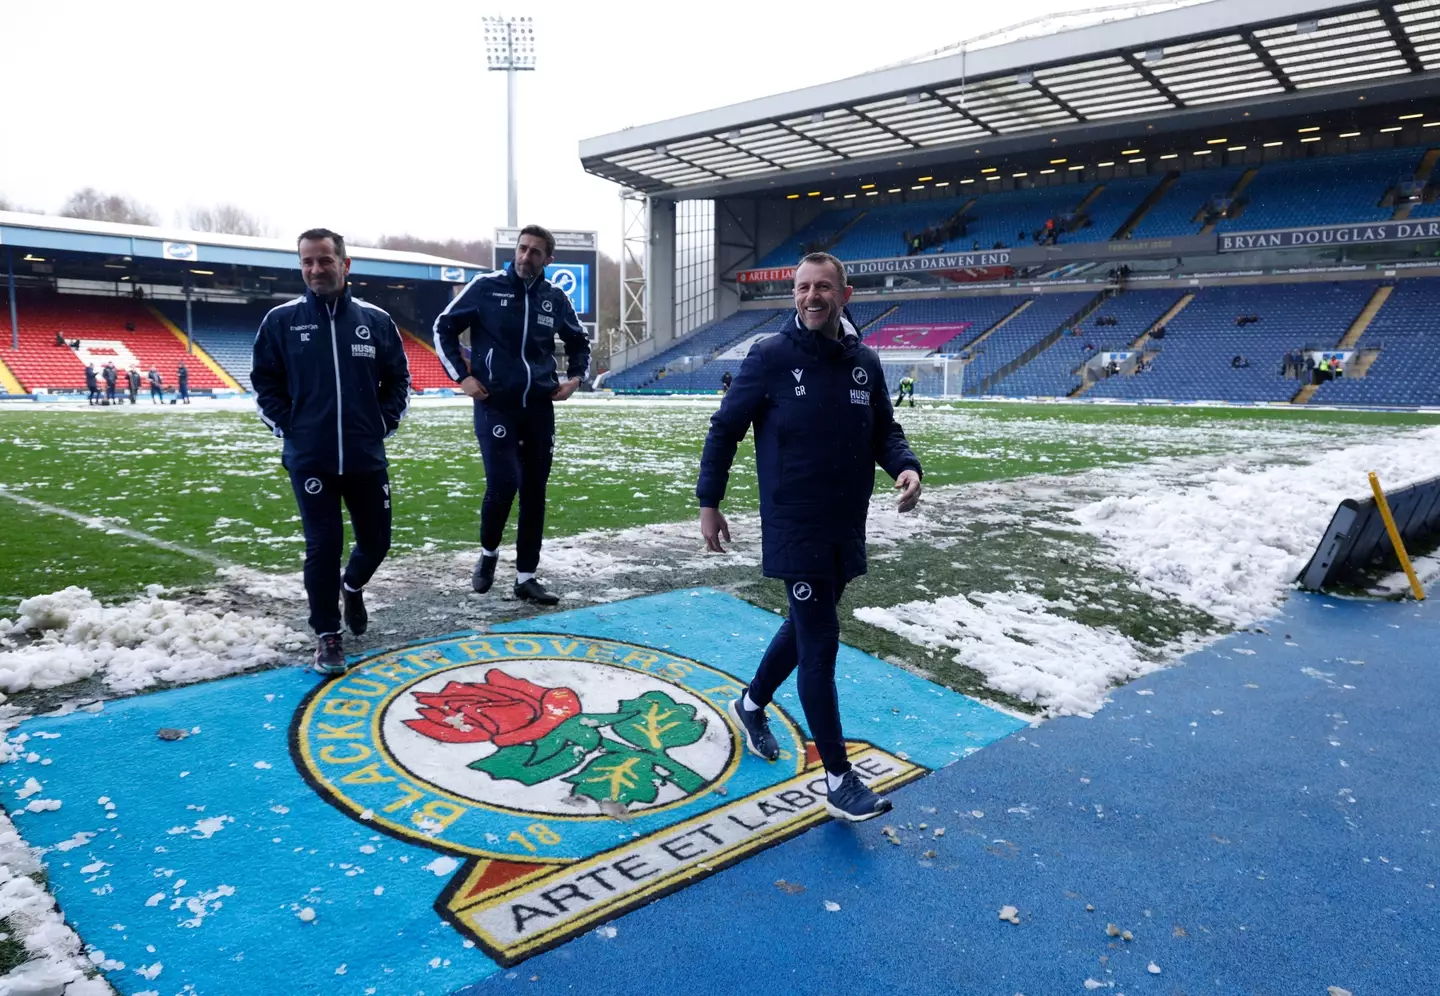 The game at Ewood Park couldn't go ahead. Image: PA Images